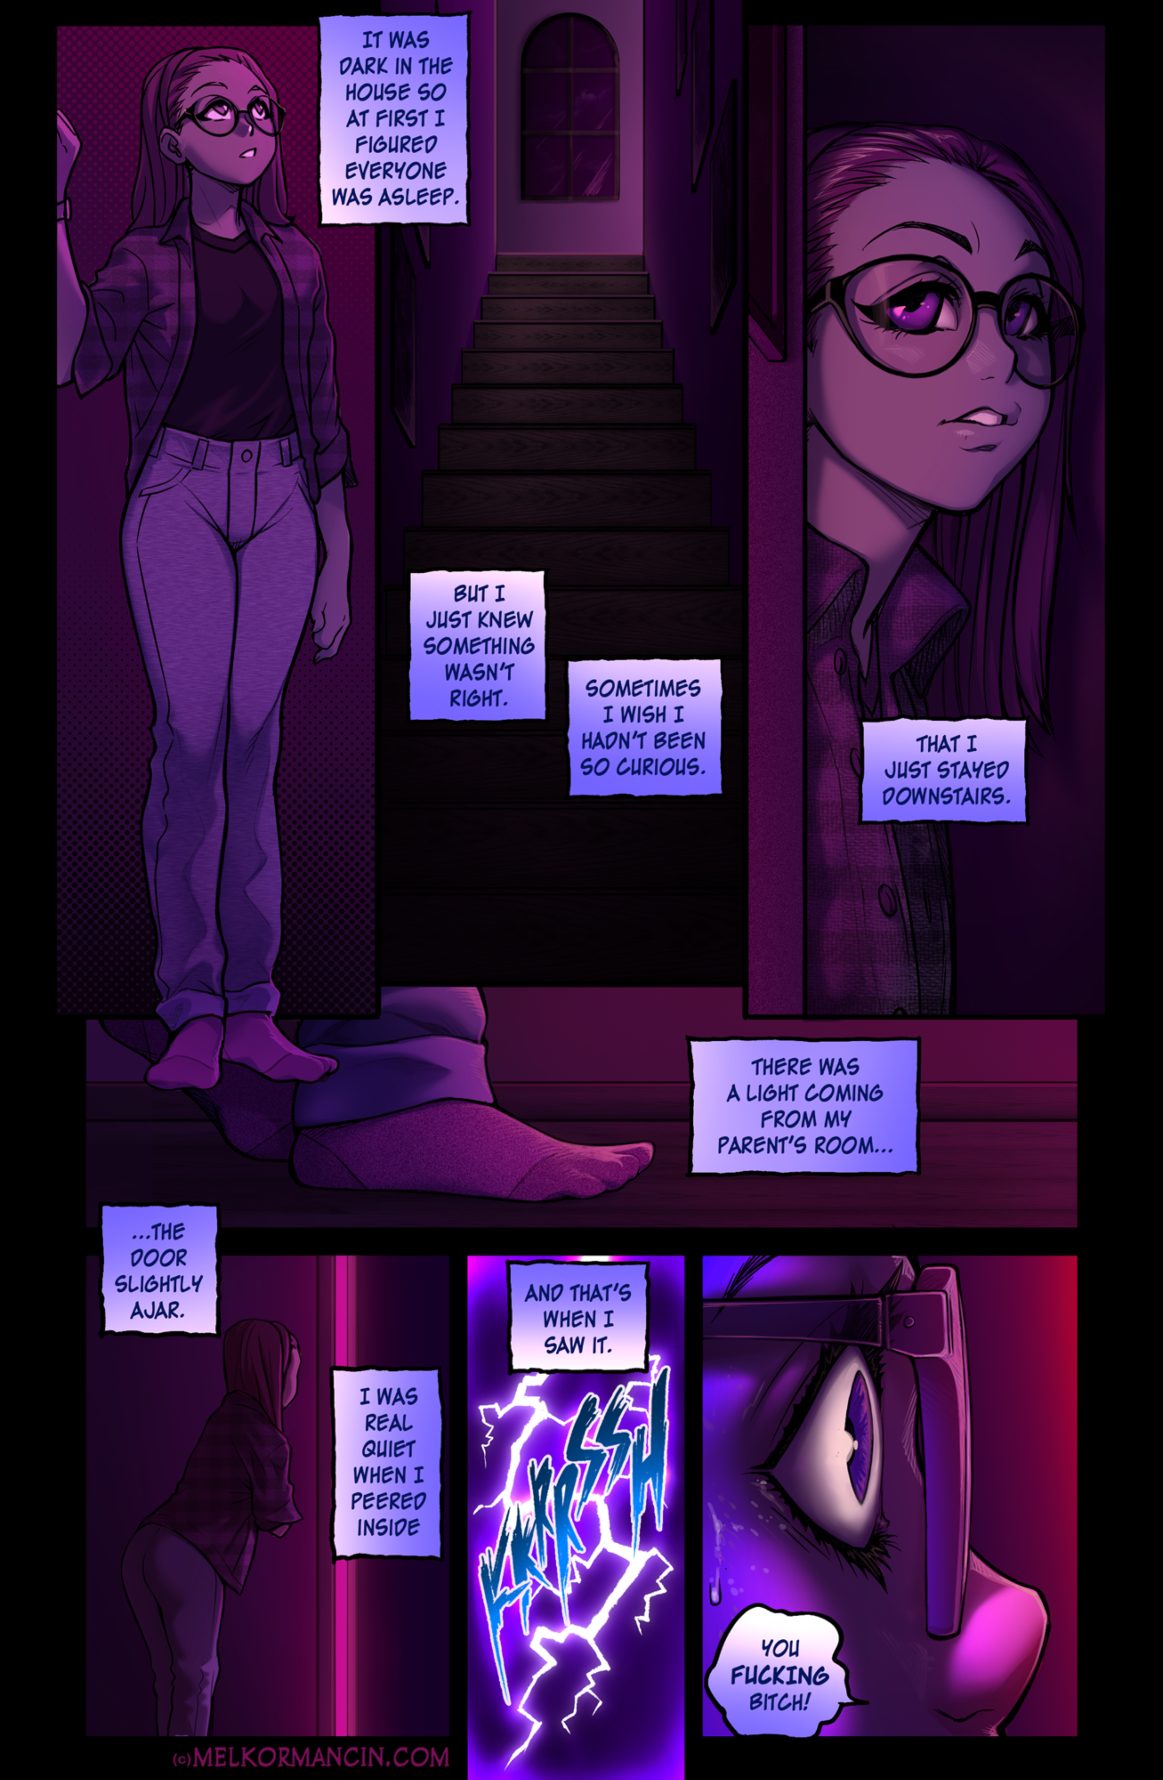 The Naughty in Law 3 Complete! - Melkormancin - FreeAdultComix